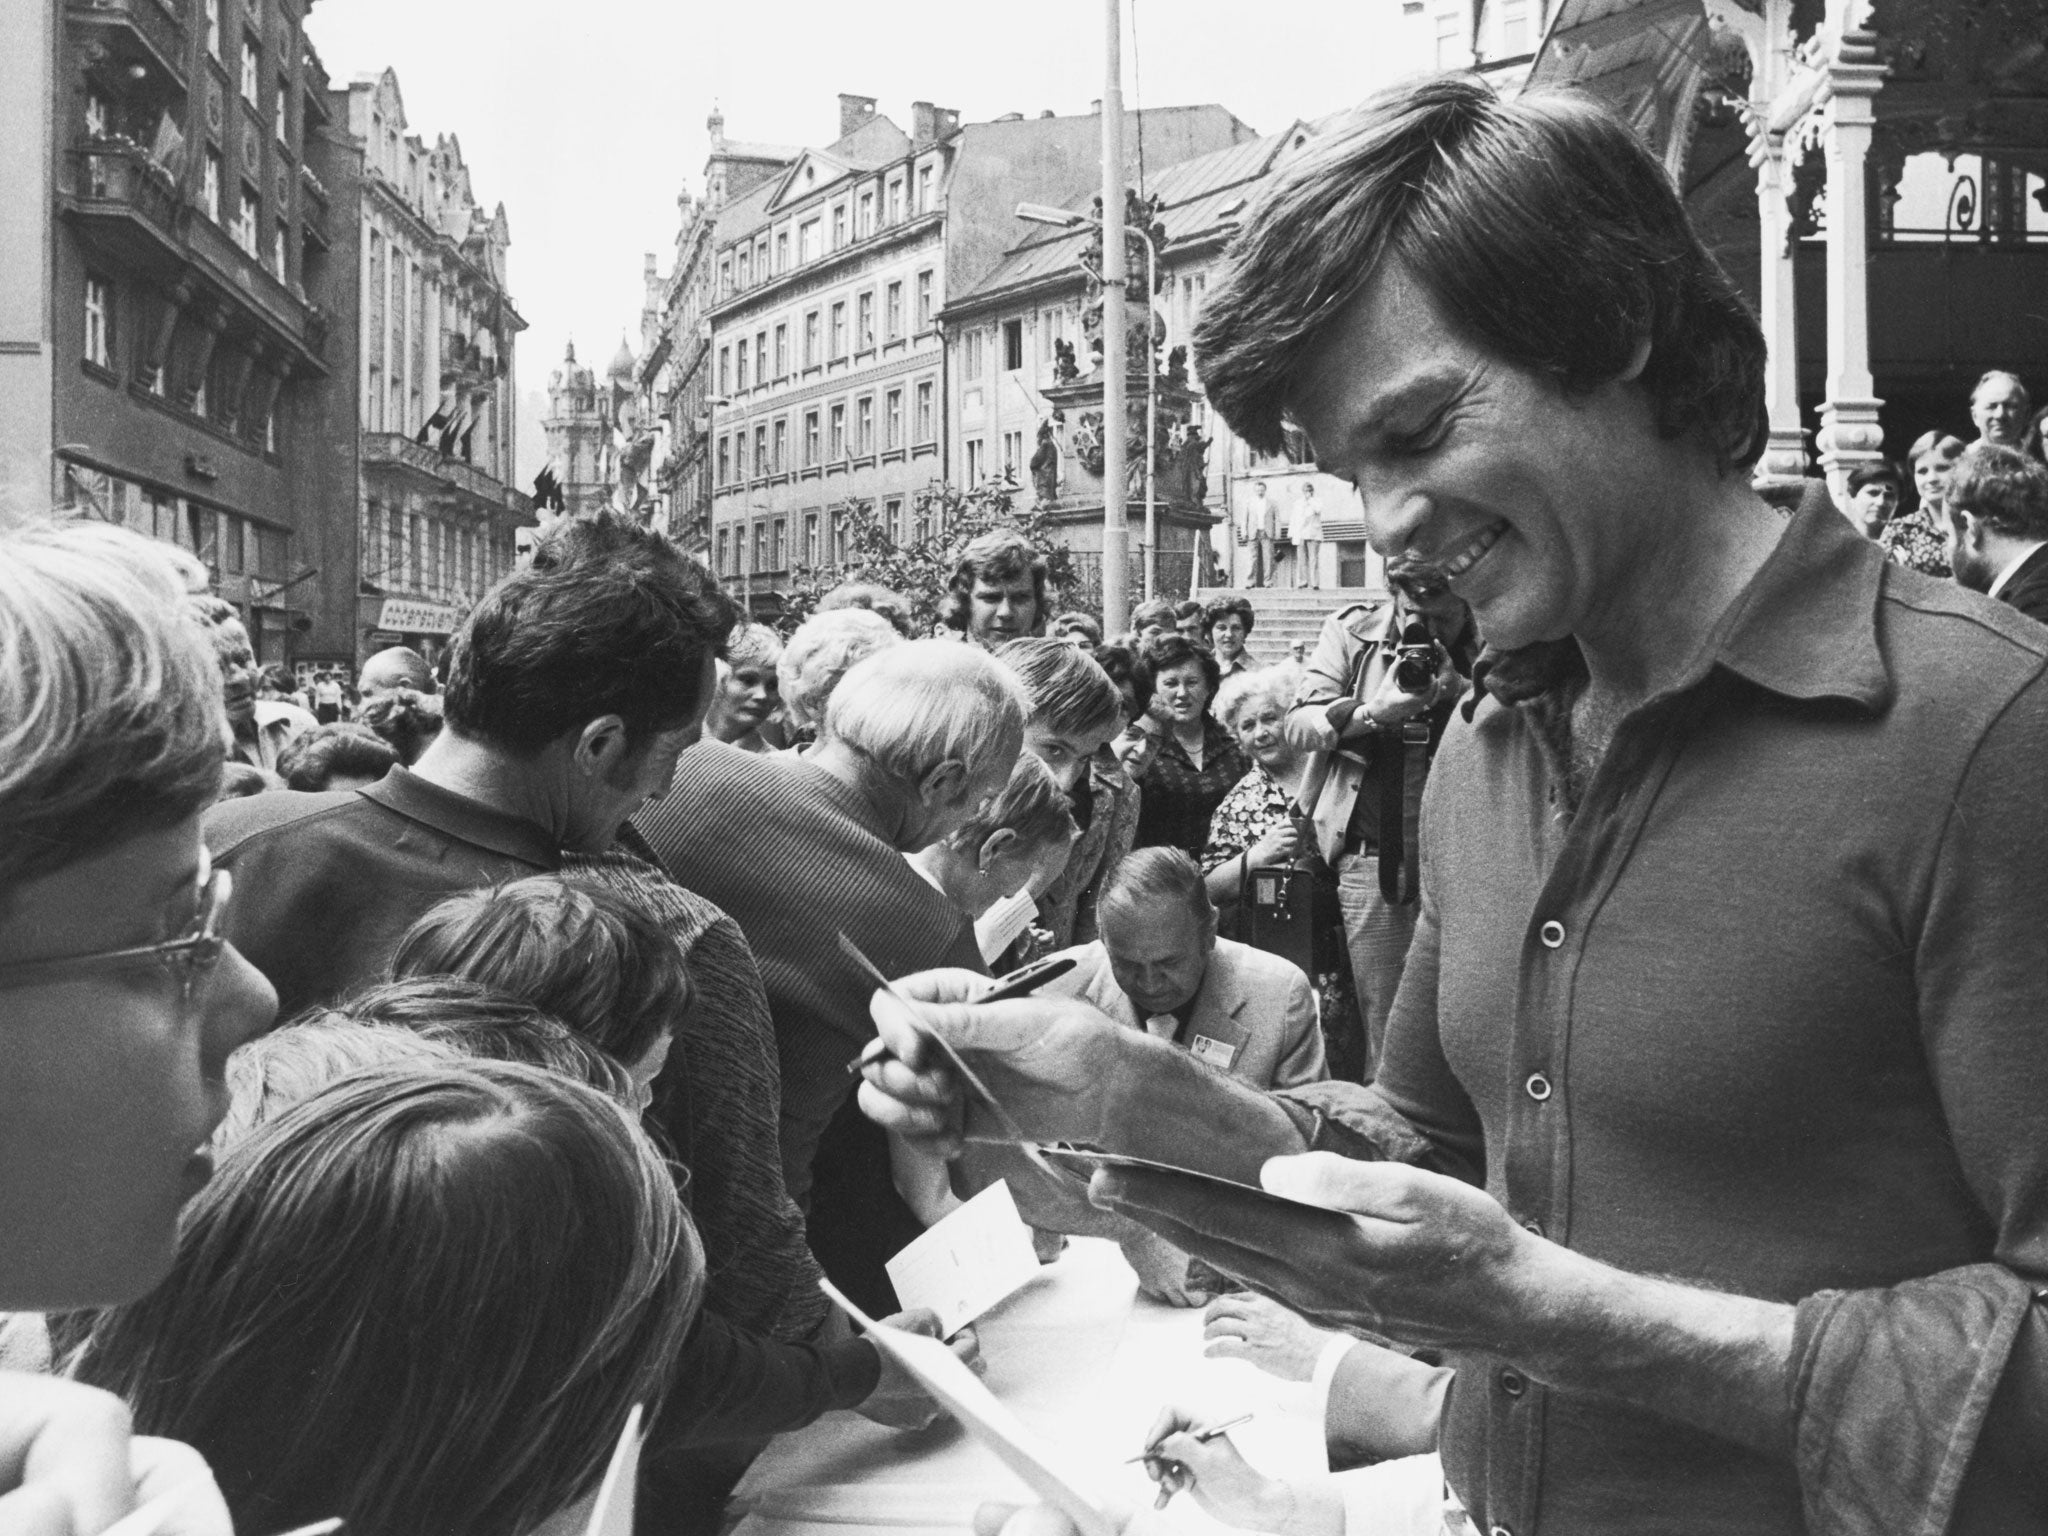 Communist star: Dean Reed signs autographs in Czechoslovakia in 1976